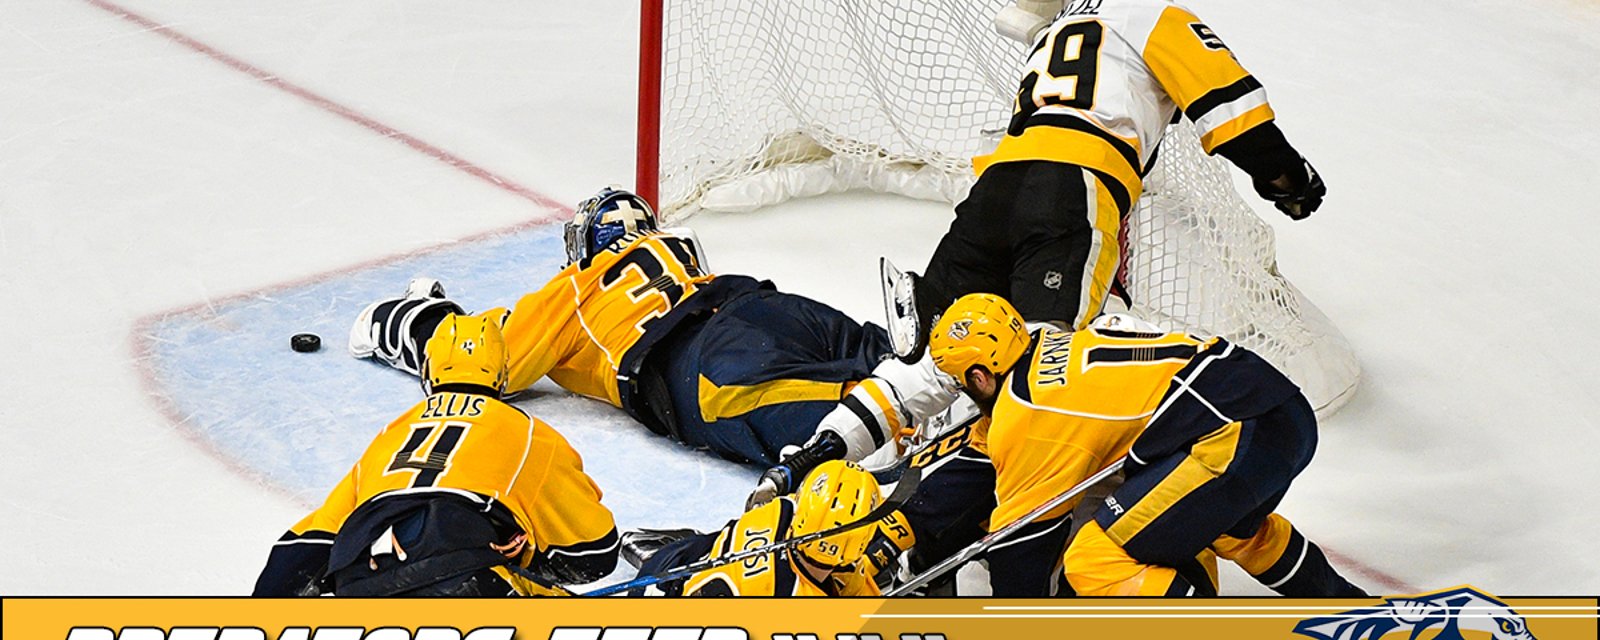 Gotta See It: Crazy Finnish announcers lose their minds during Preds/Pens game 4